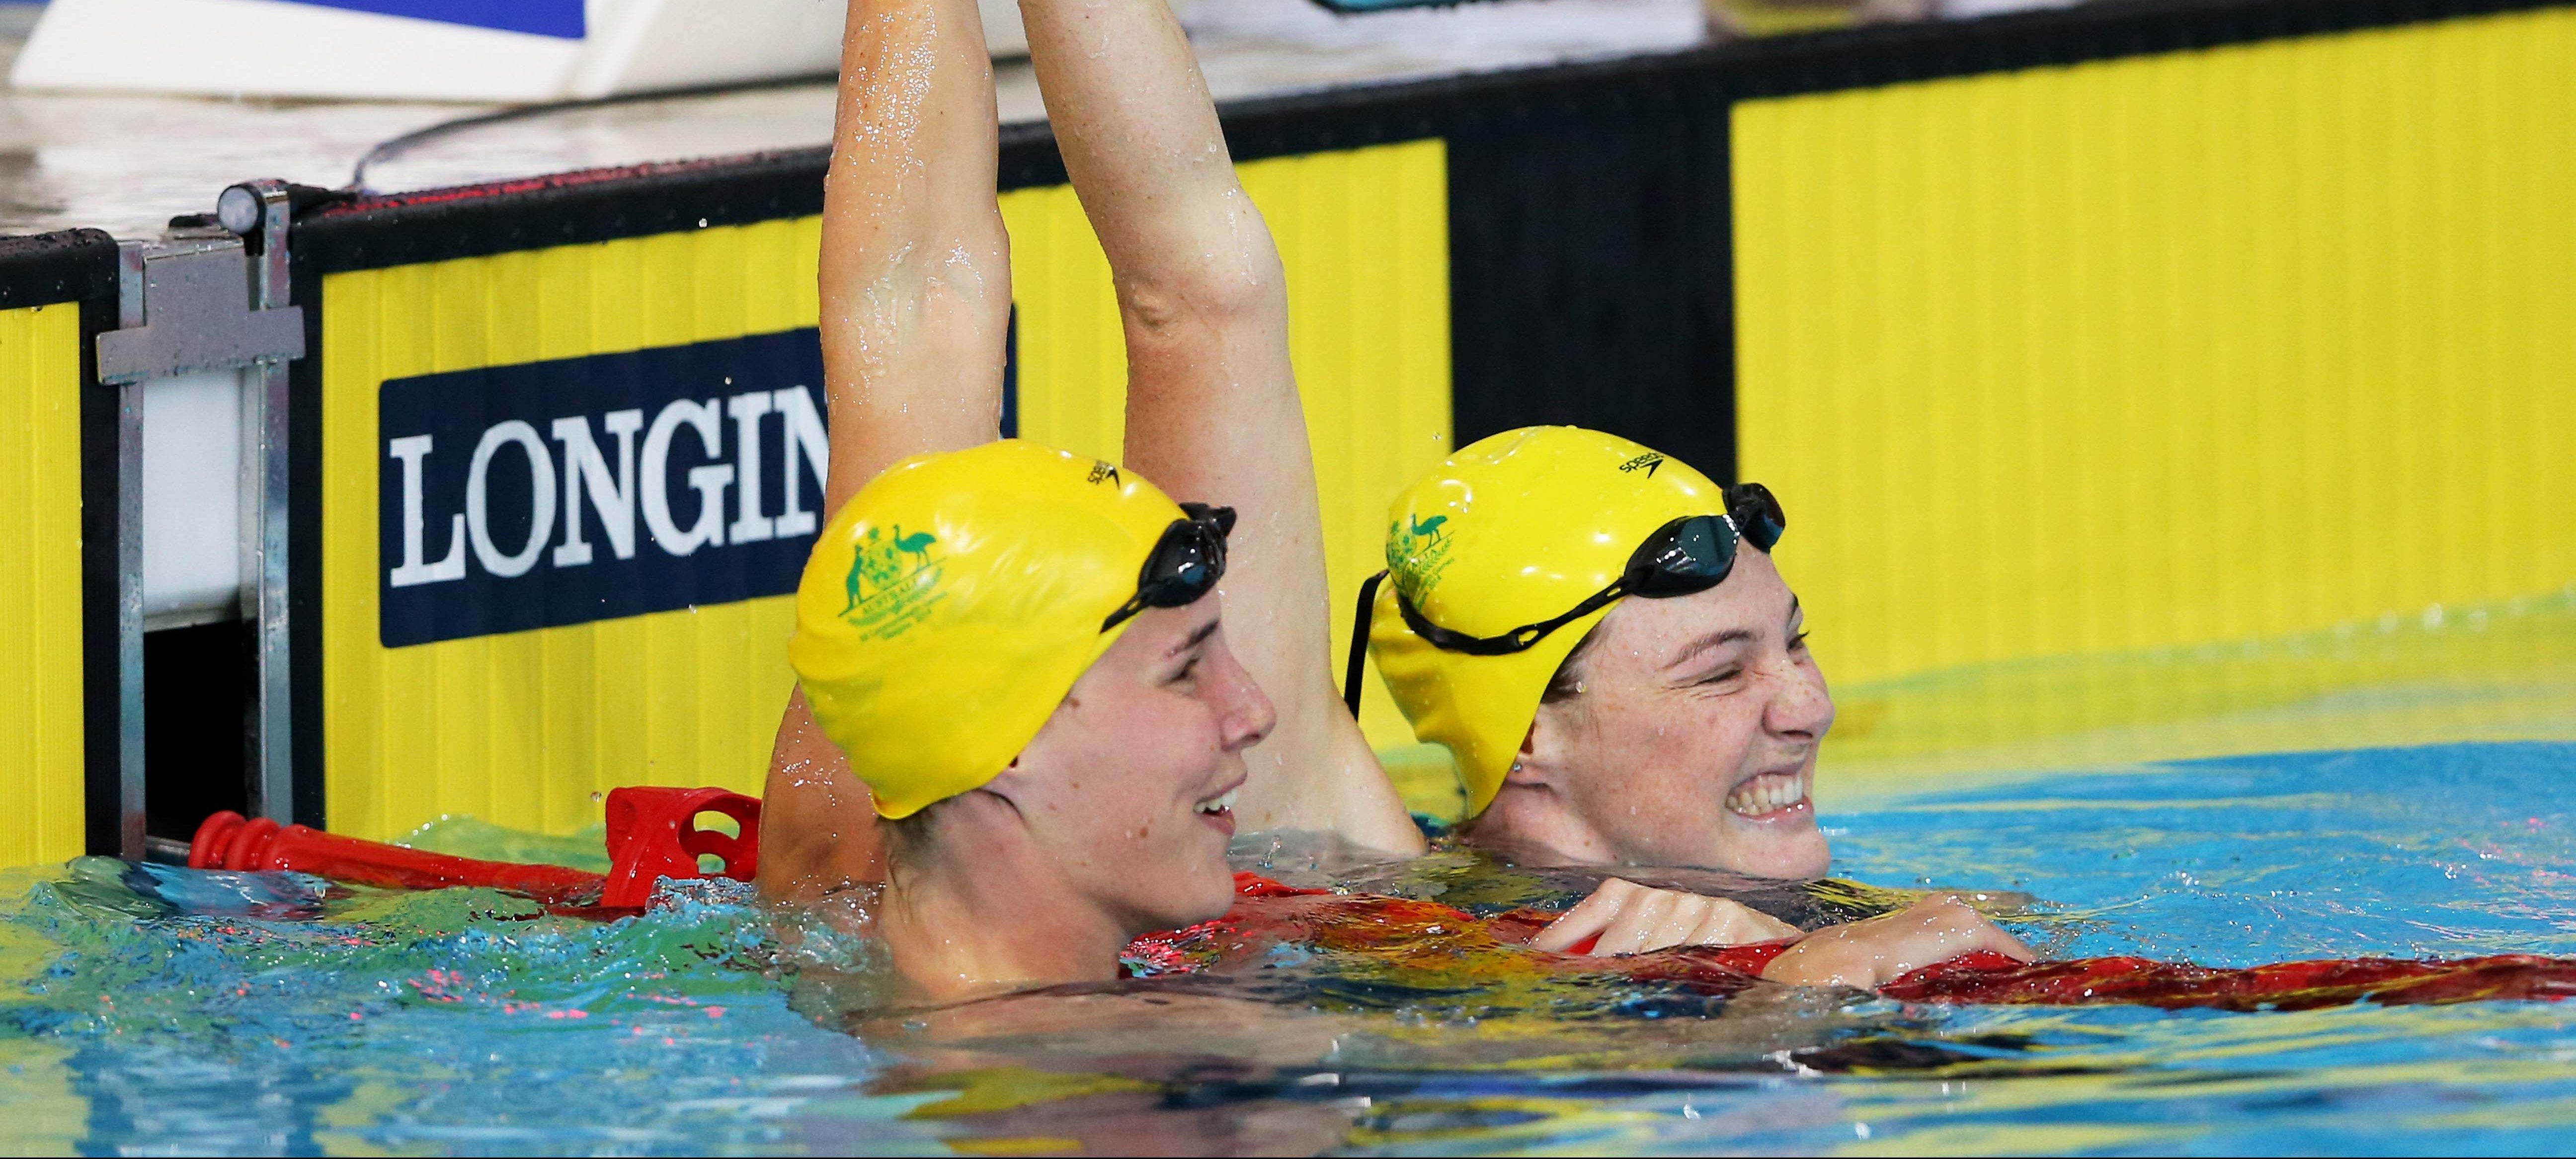 GLASGOW, SCOTLAND - JULY 28:  Cate Campbell (R) of Australia celebrates winning the gold medal with silver medallist Bronte Campbell of Australia after the Women's 100m Freestyle Final at Tollcross International Swimming Centre during day five of the Glasgow 2014 Commonwealth Games on July 28, 2014 in Glasgow, Scotland.  (Photo by Quinn Rooney/Getty Images)